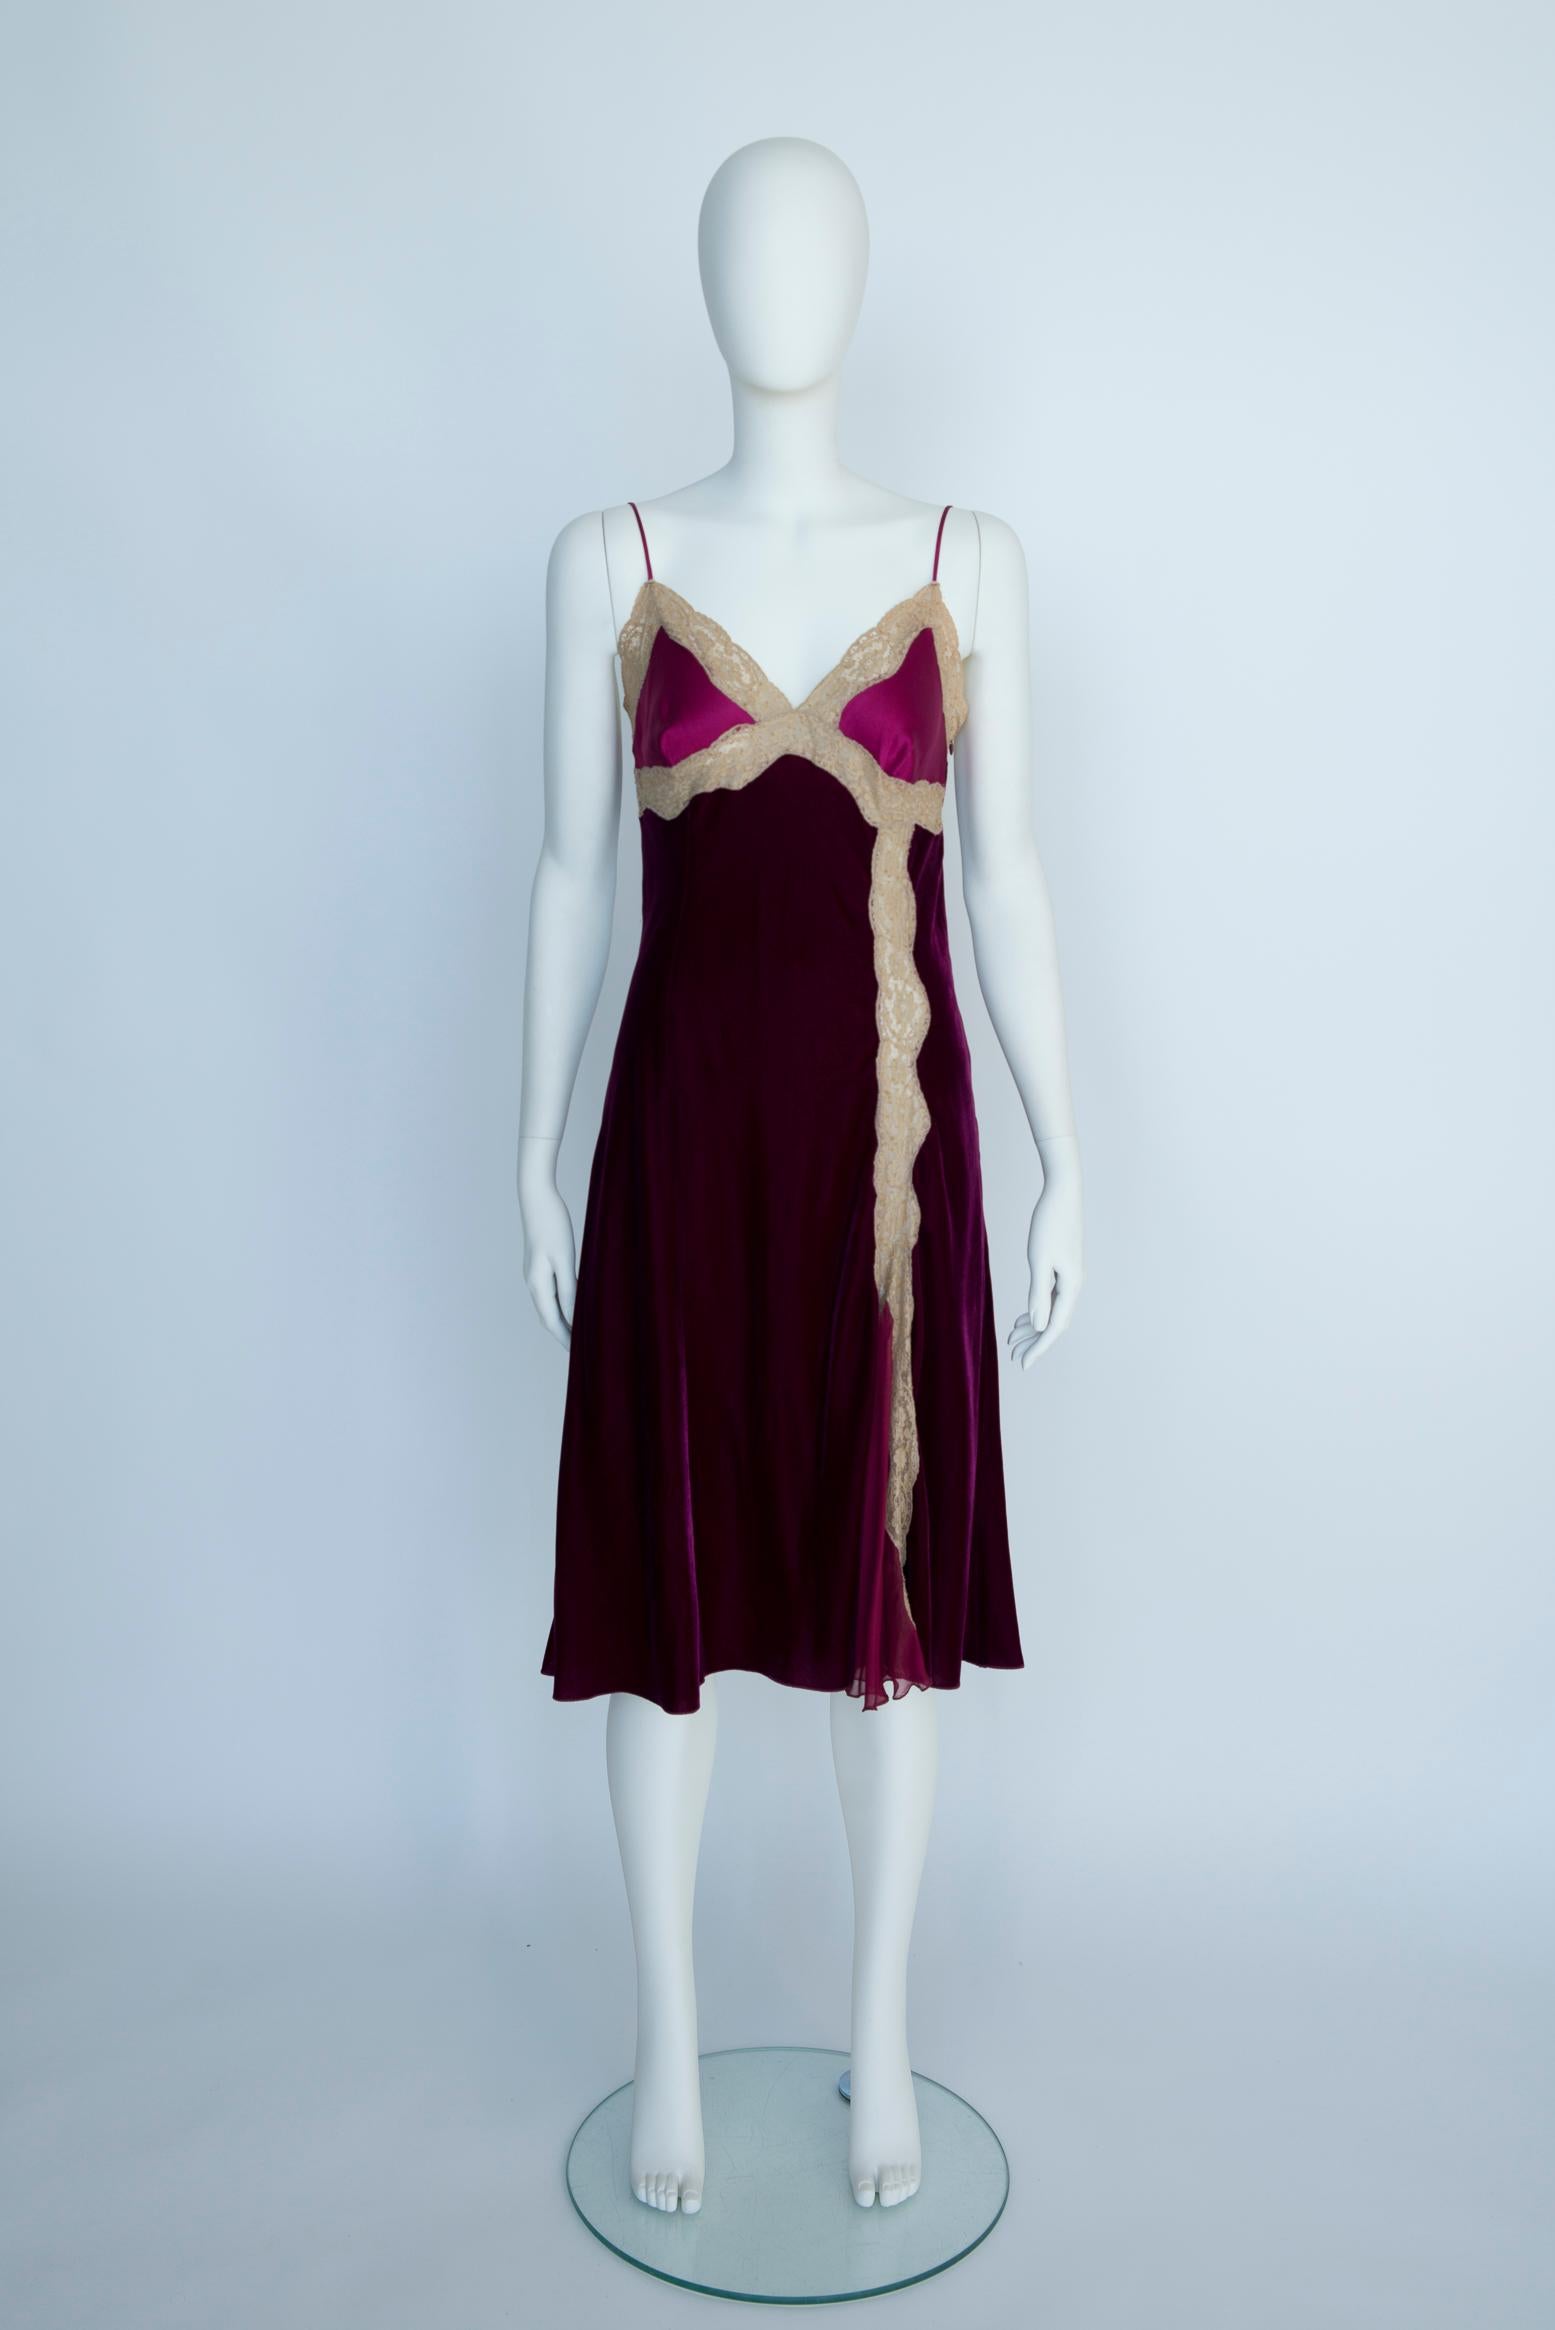 Popularized by Courtney Love and the Supermodels, this original slip dress of the 90's remains extremely fashionable as nearly all trendy brands offer it nowadays in their collections. This wonderful late 90’s - early 00's Alberta Ferretti dress